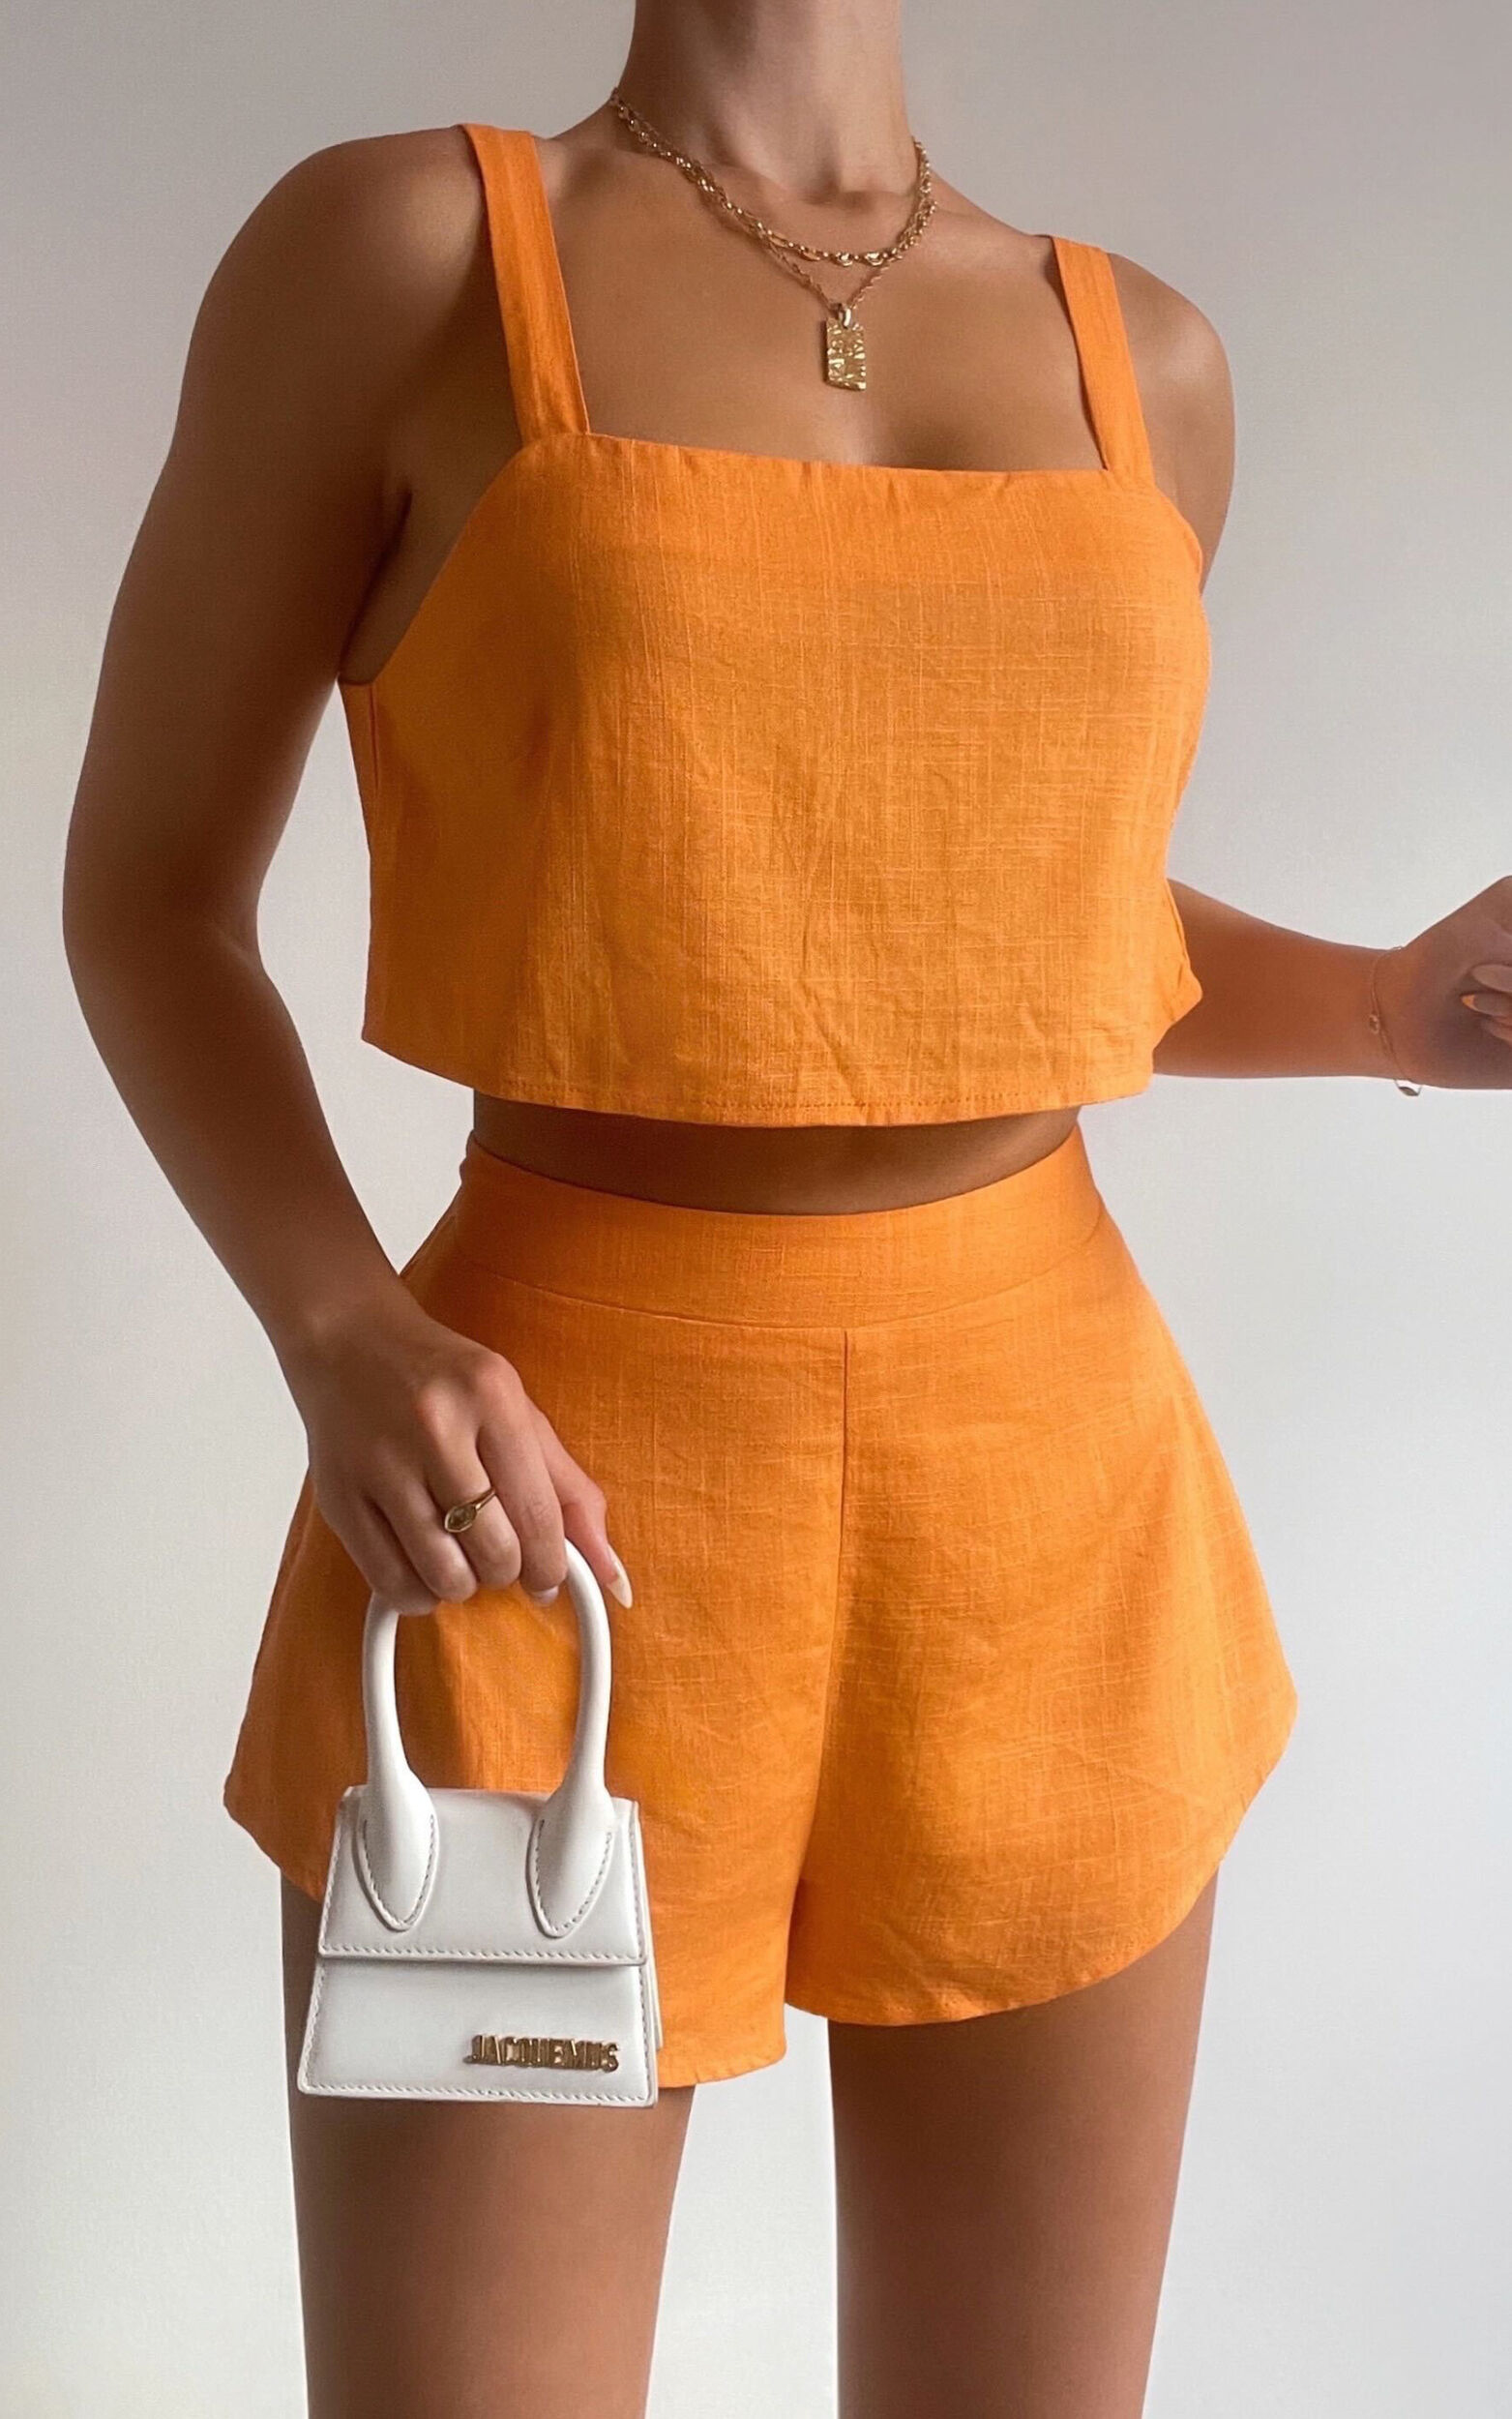 Zanrie Two Piece Set - Linen Look Square Neck Crop Top and High Waist Mini Flare Shorts Set in Orange - 04, ORG2